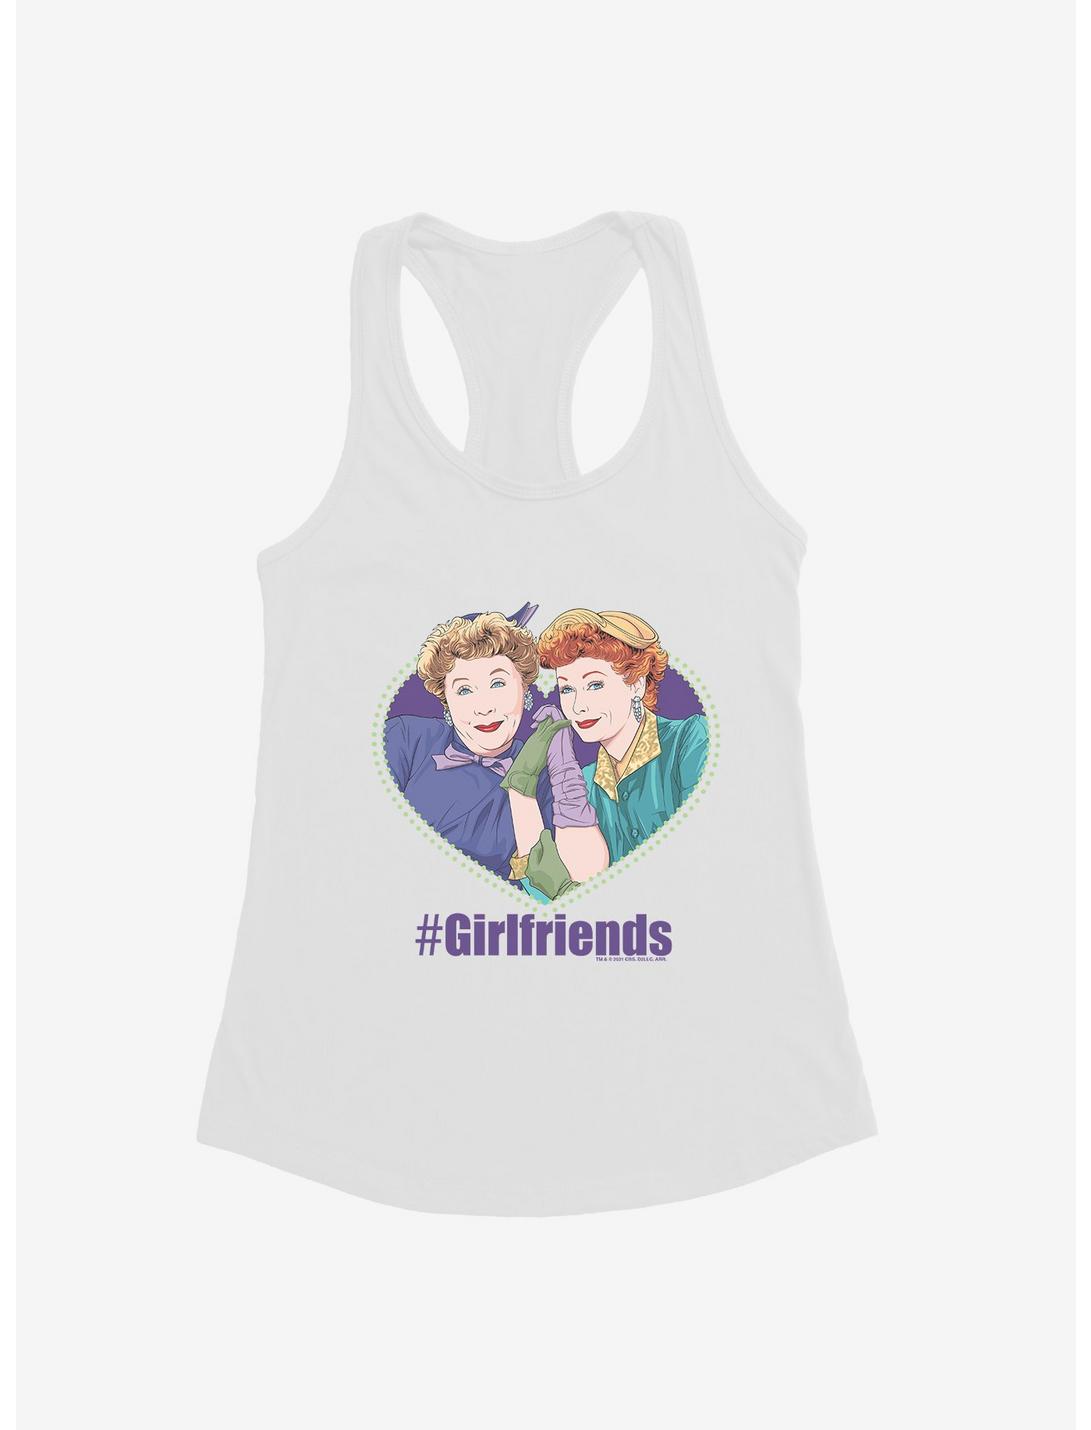 I Love Lucy Hashtag Girlfriends Girls Tank, , hi-res